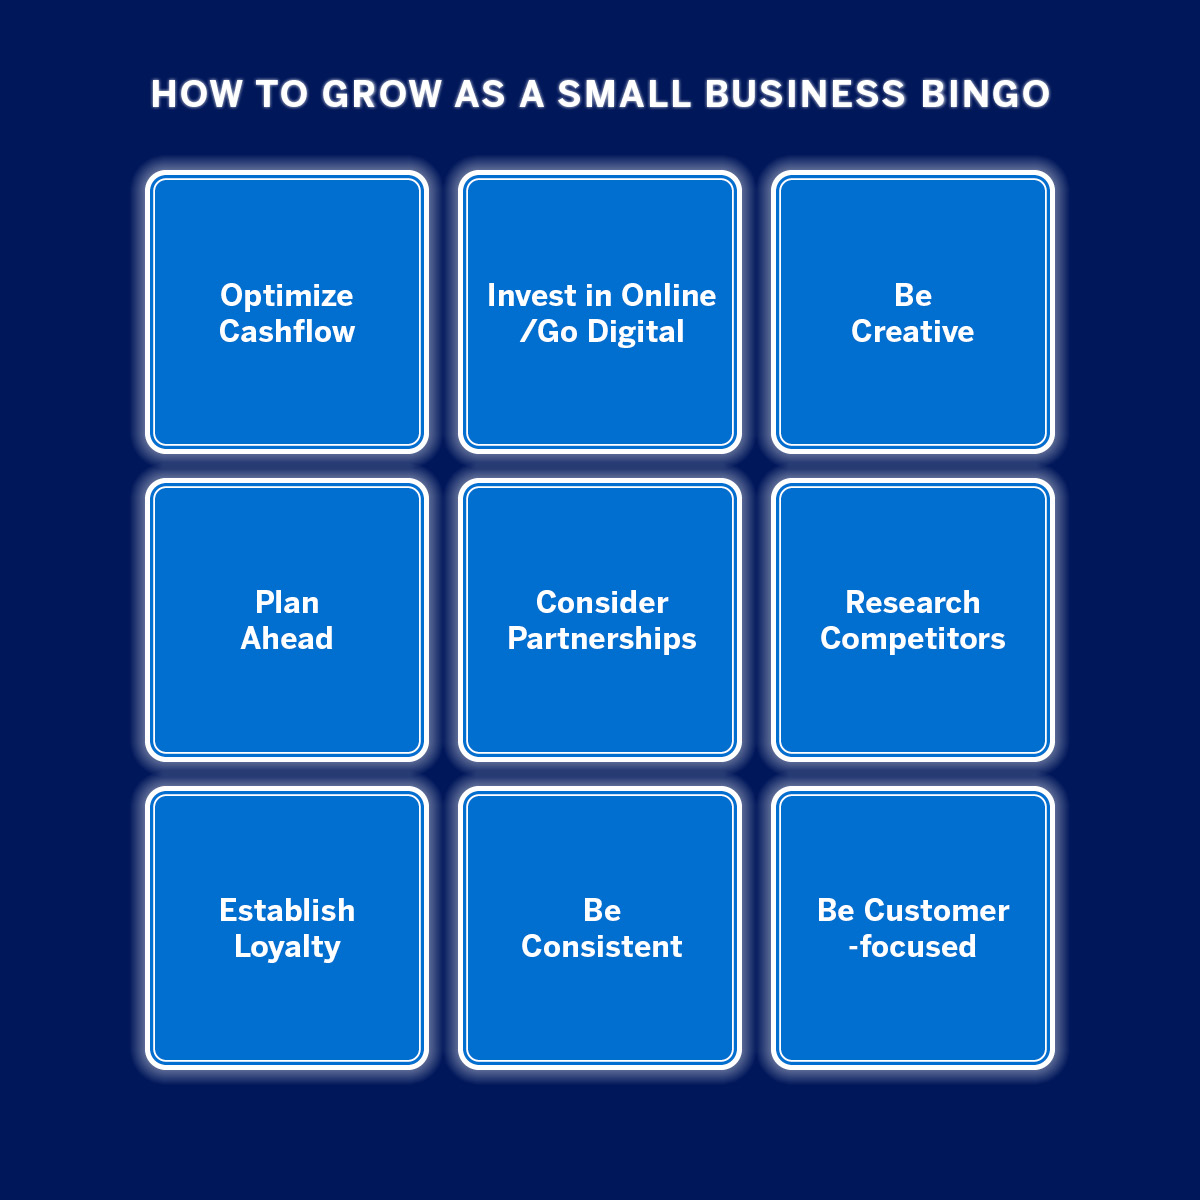 Are you looking to grow as a small business? We've got the tips and tricks that could help you do just that! Let us know if you've got Bingo below 👇 #AmexBusiness